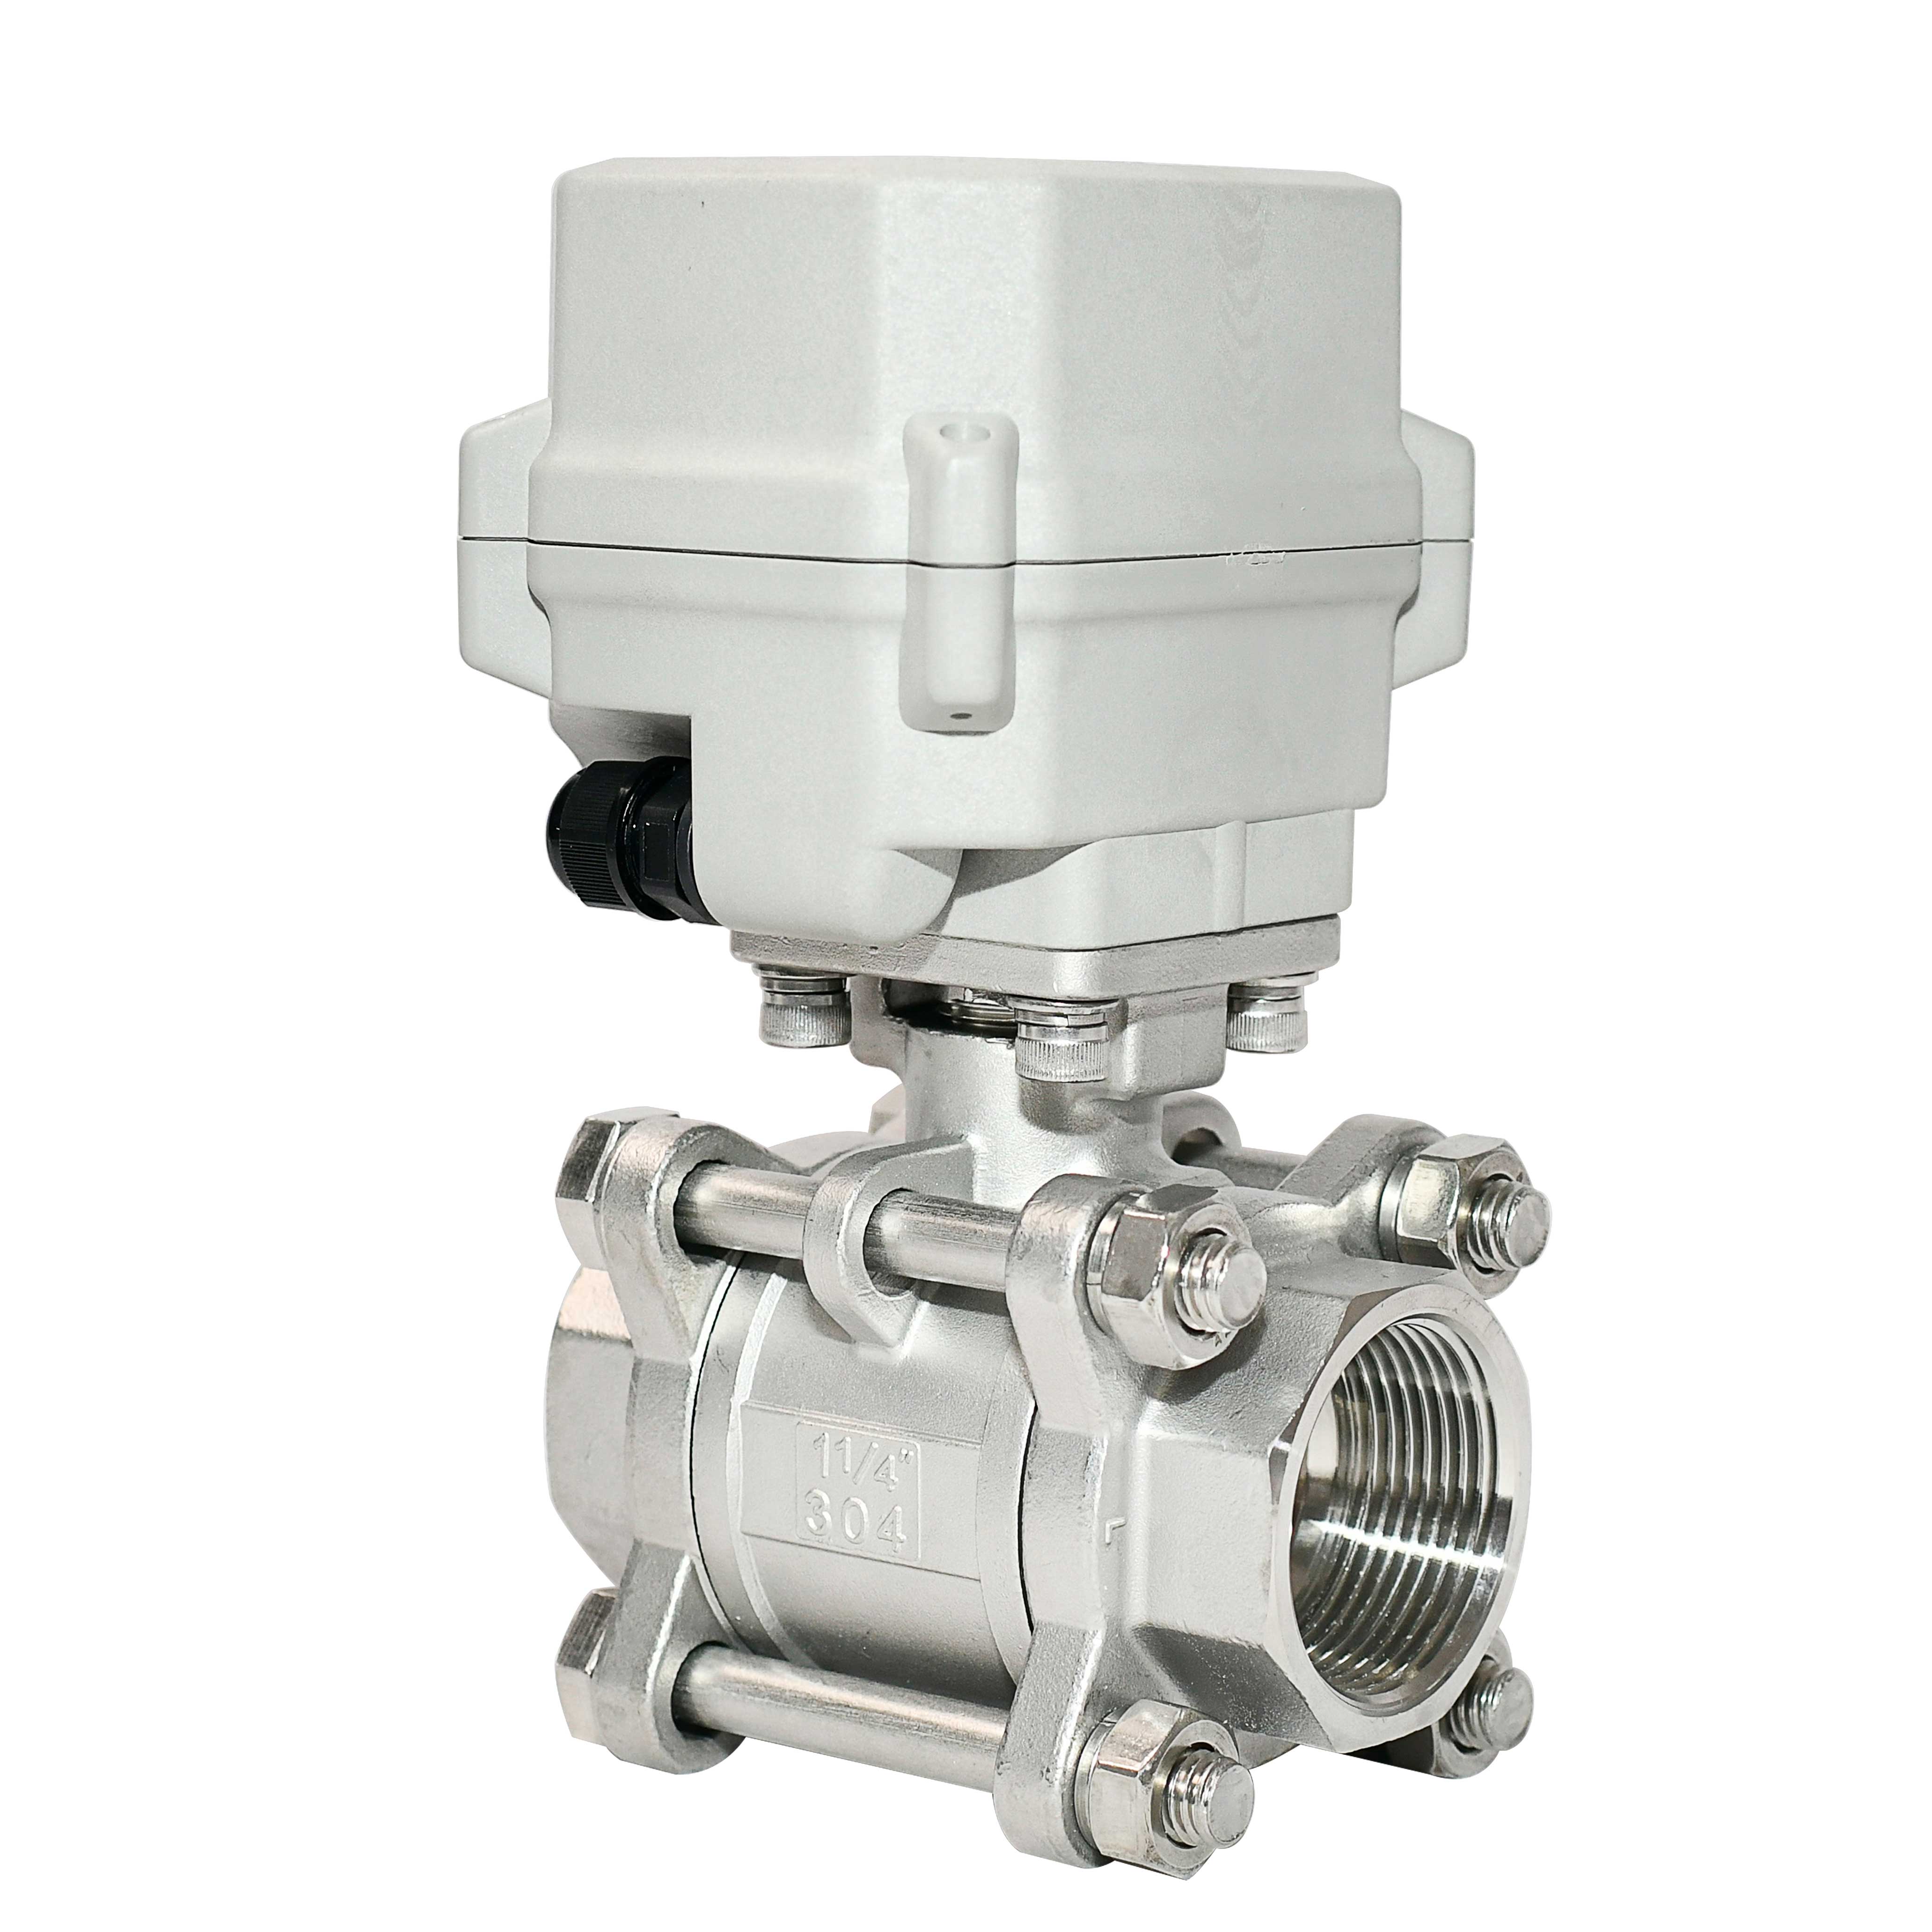 What is stainless steel three-piece ball valve?